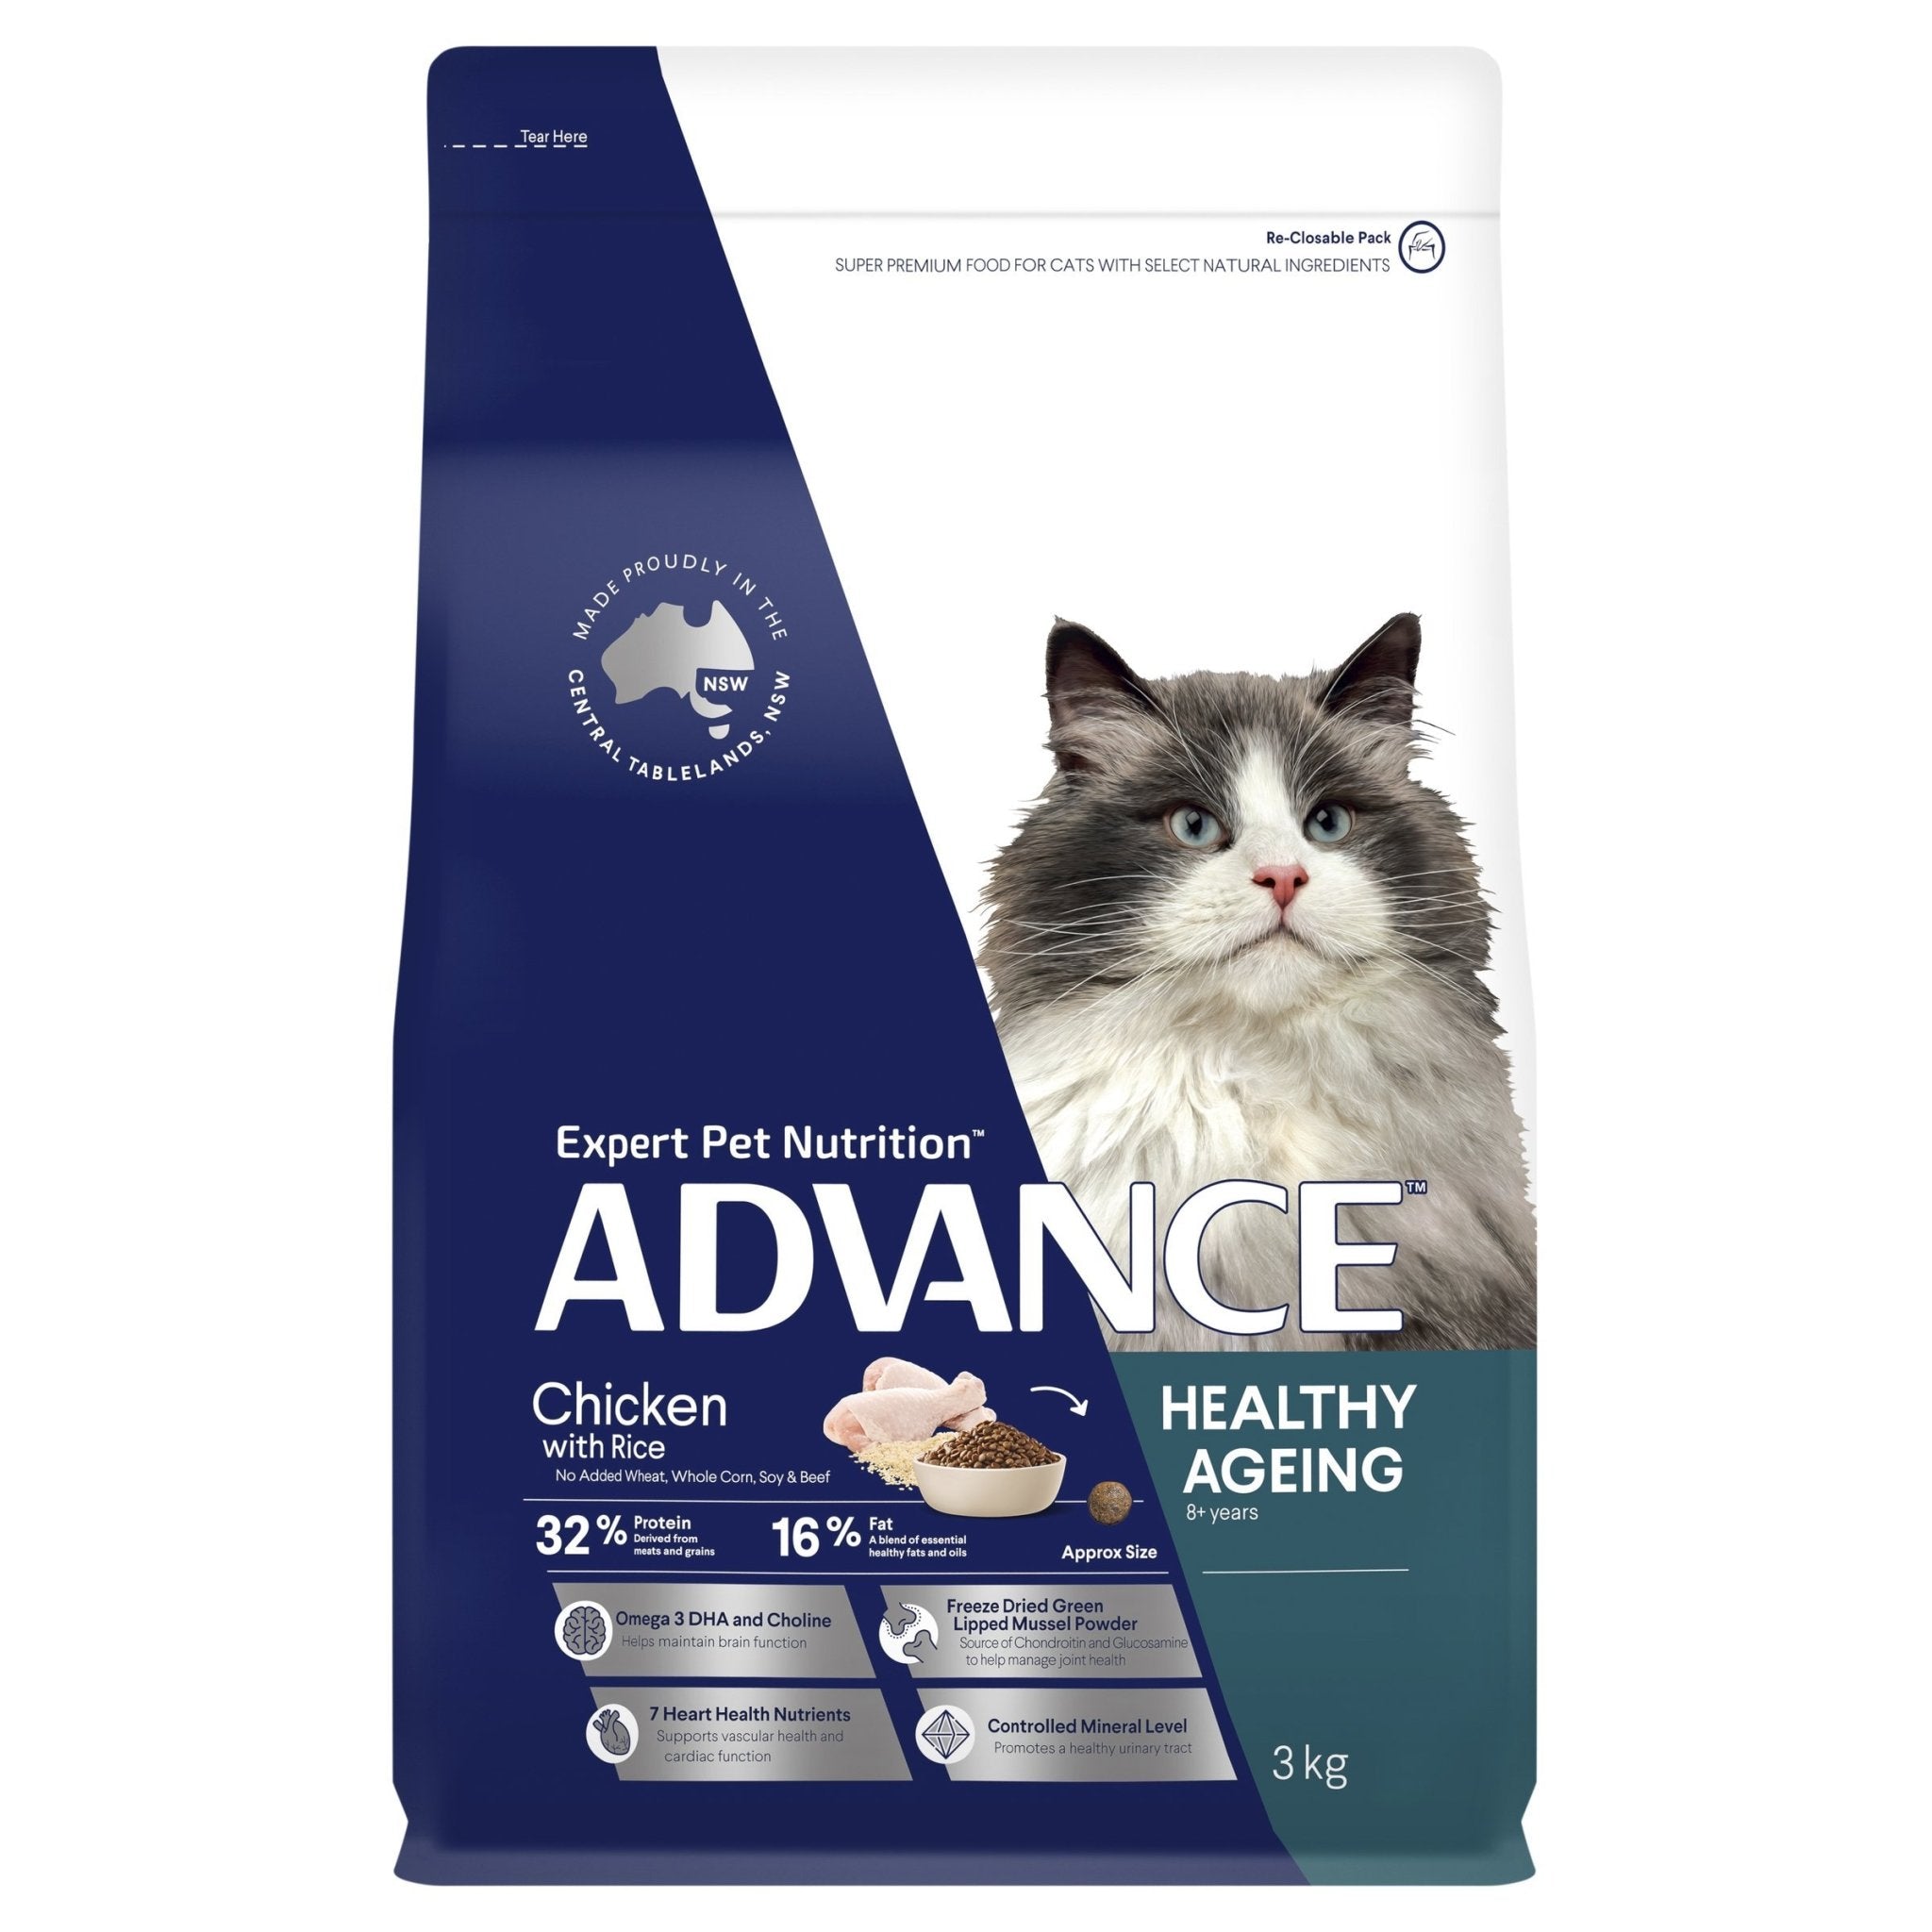 ADVANCE Healthy Ageing Dry Cat Food Chicken with Rice 3kg Bag